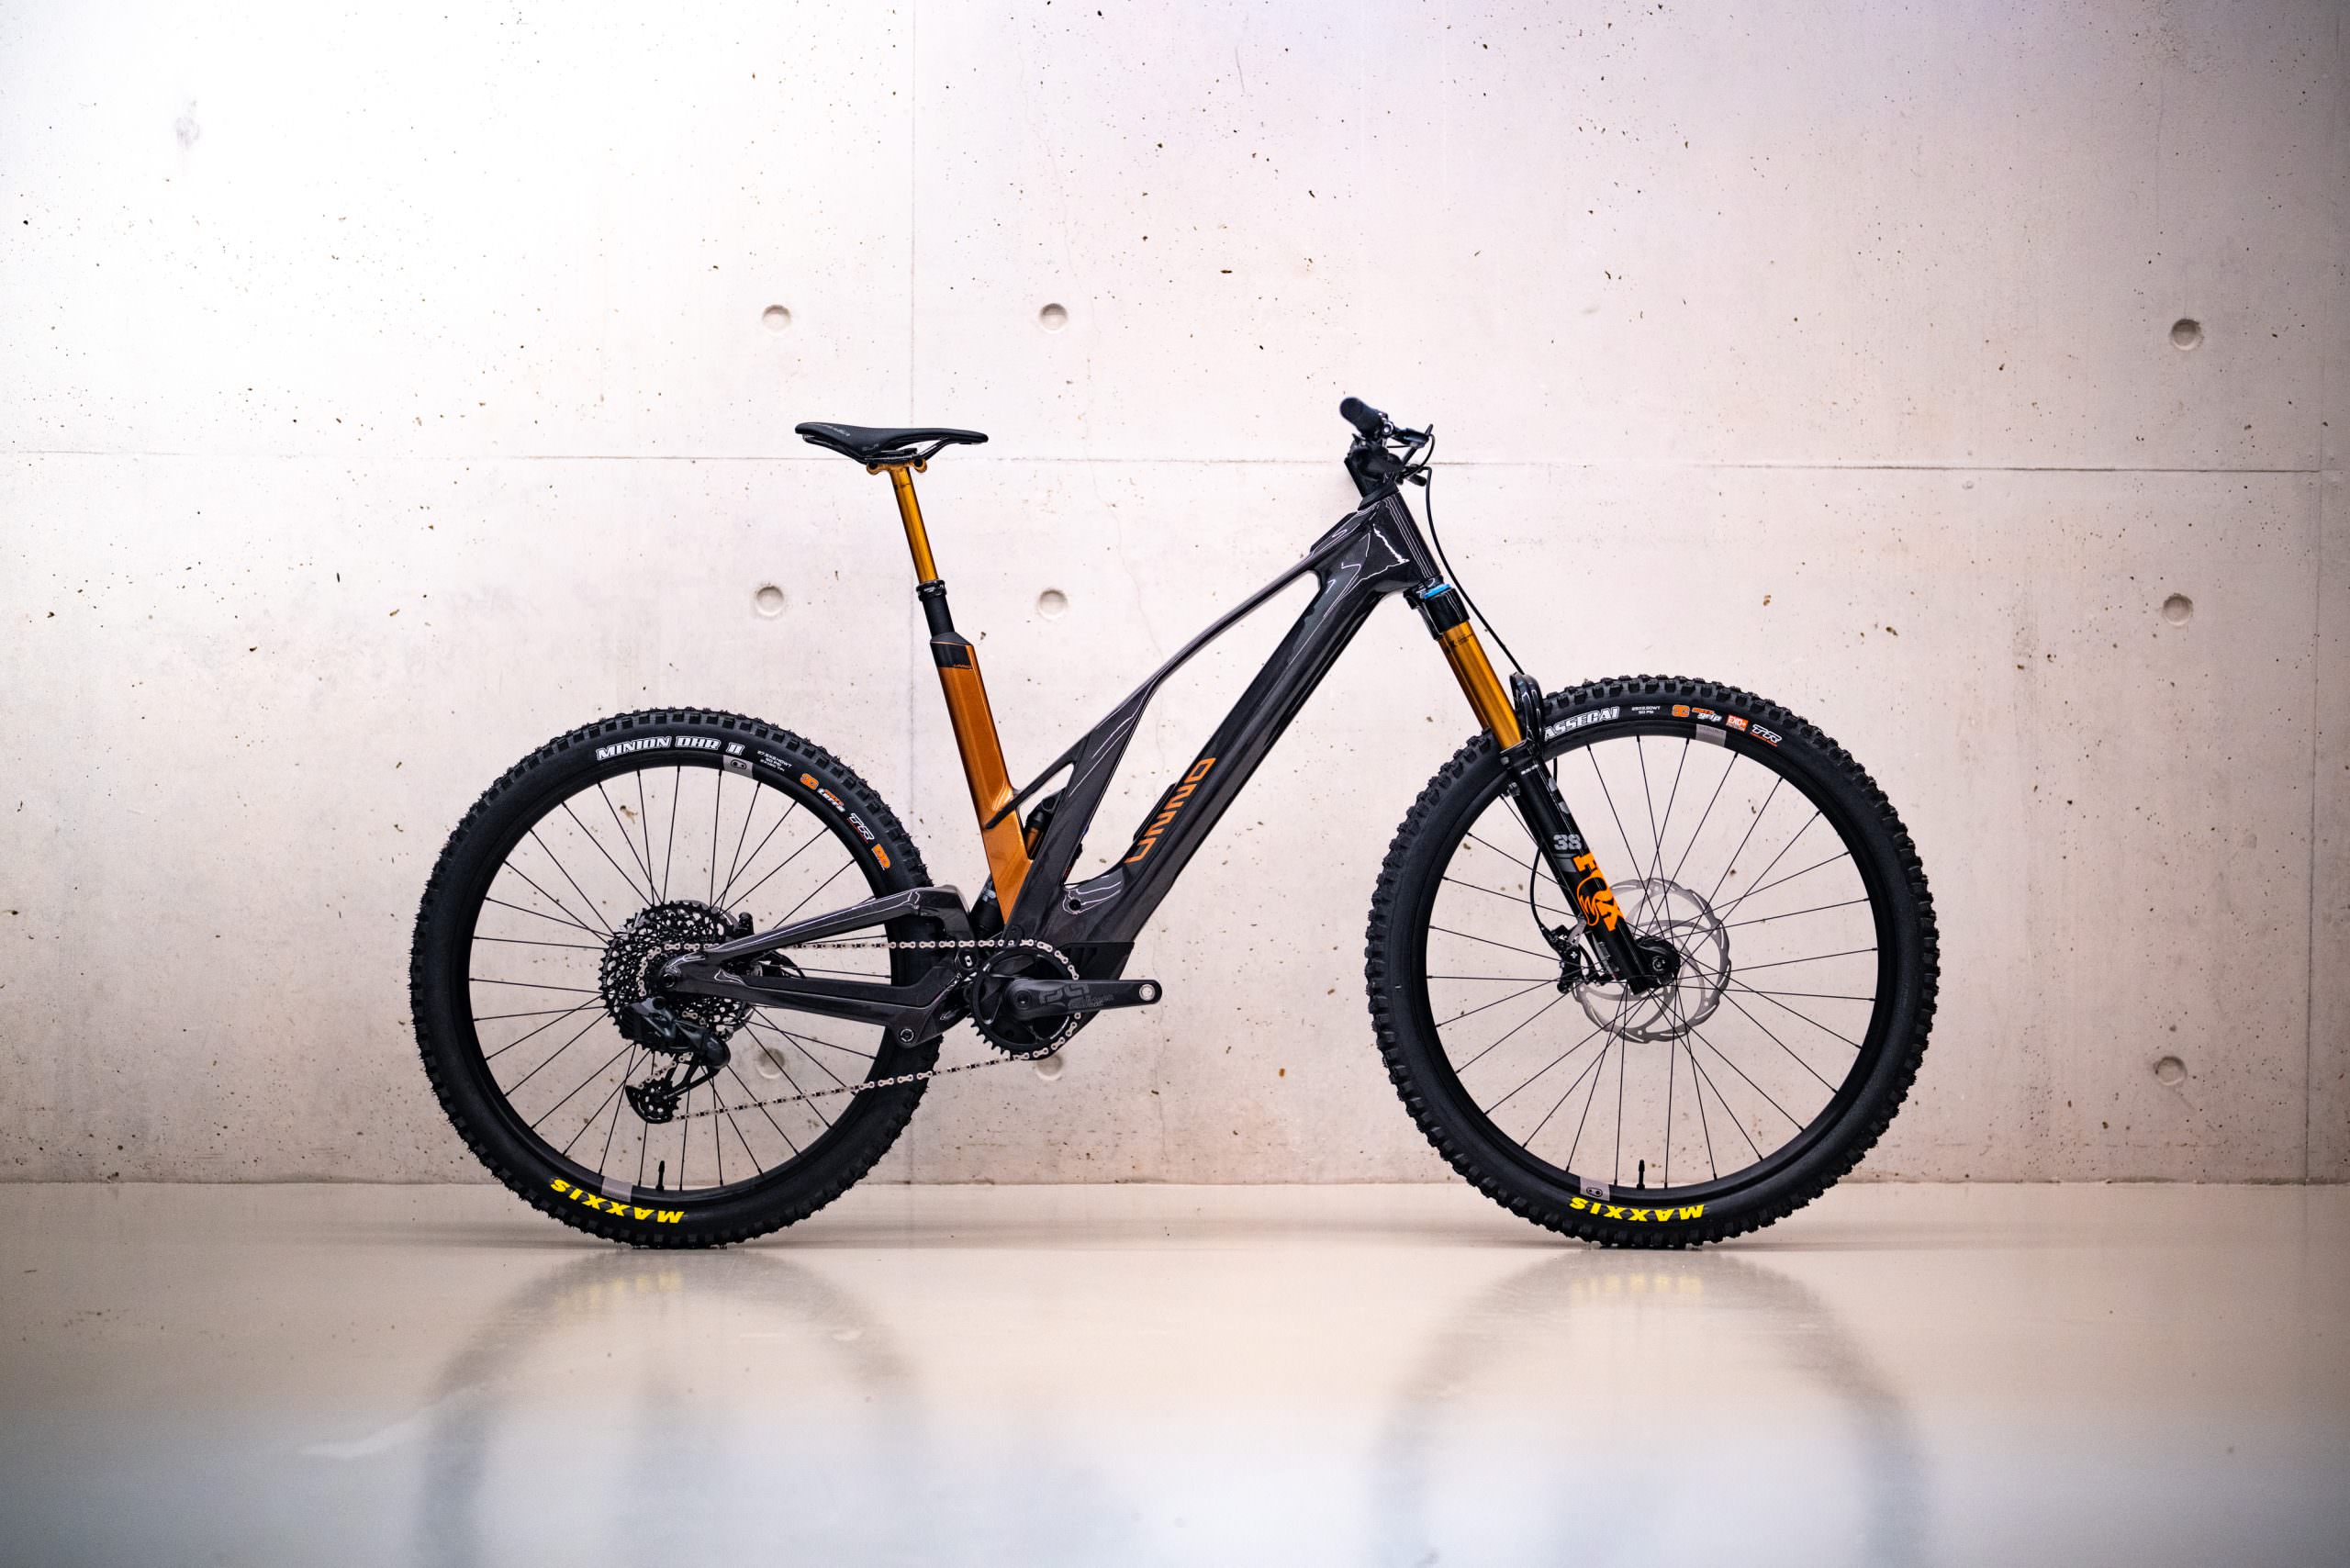 Exclusive first ride review of the new 2022 UNNO MITH Race eMTB